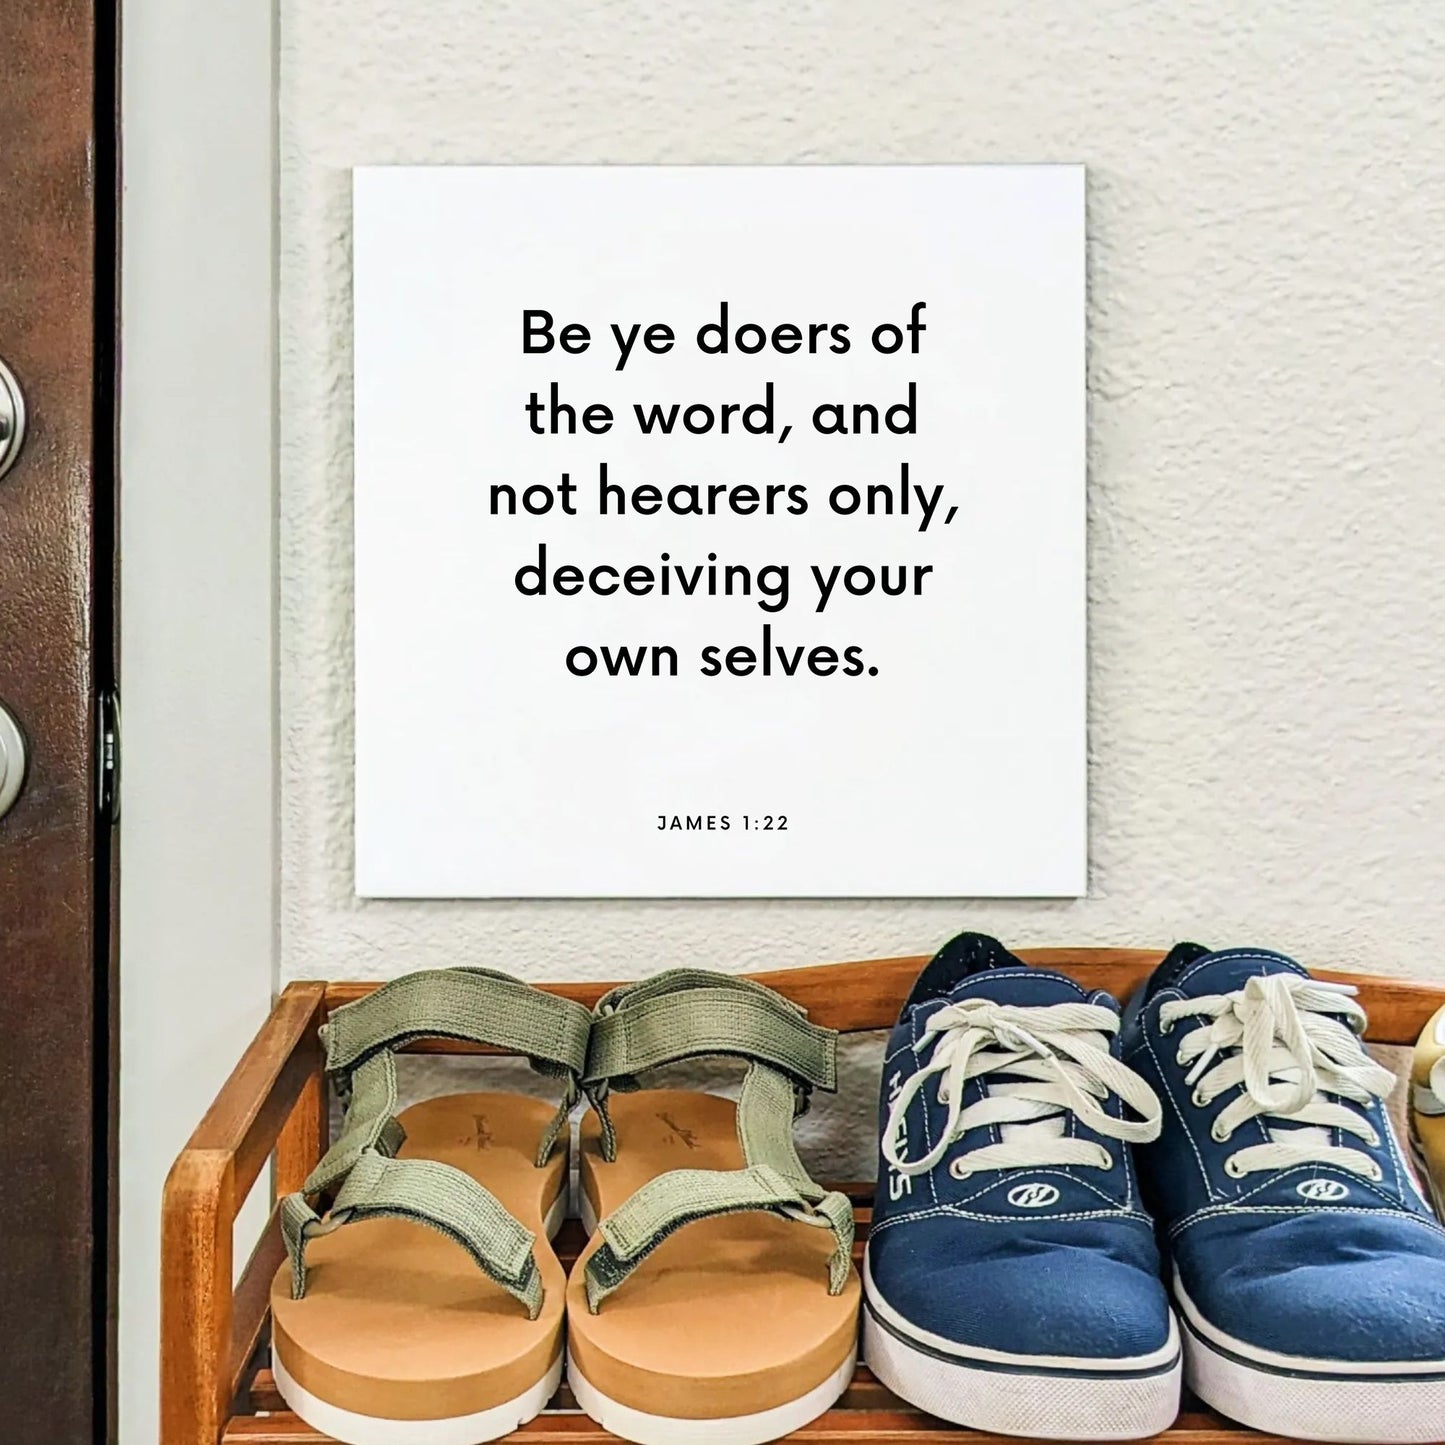 Shoes mouting of the scripture tile for James 1:22 - "Be ye doers of the word, and not hearers only"